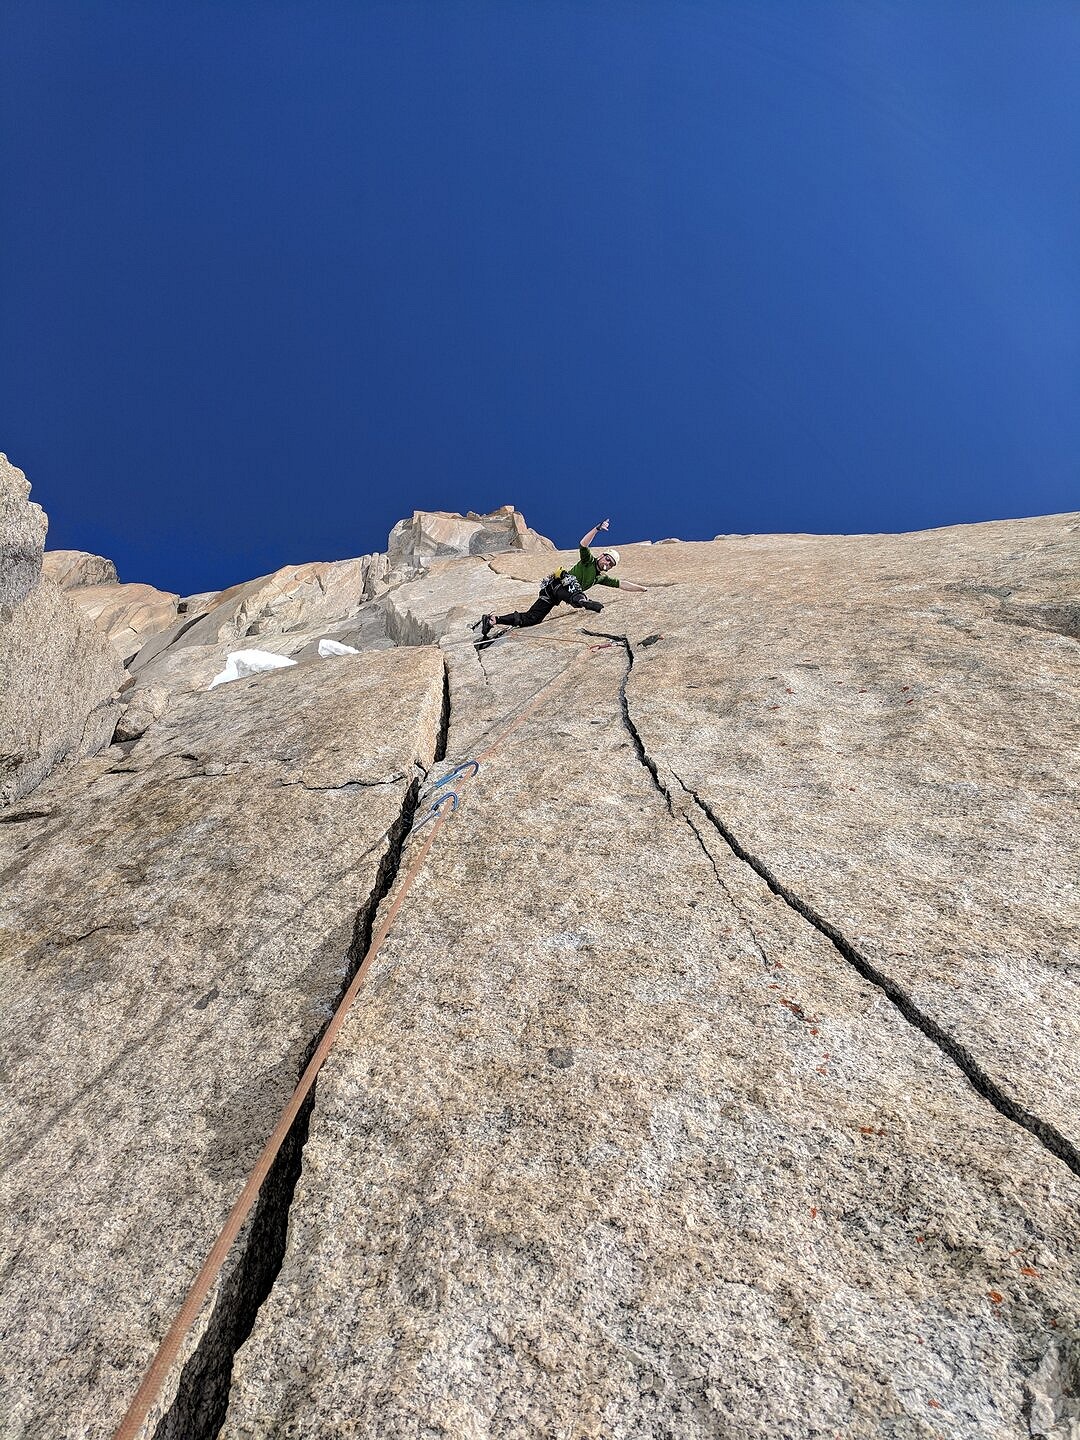 Graham McGrath on the first pitch of American Beauty  © John McCune